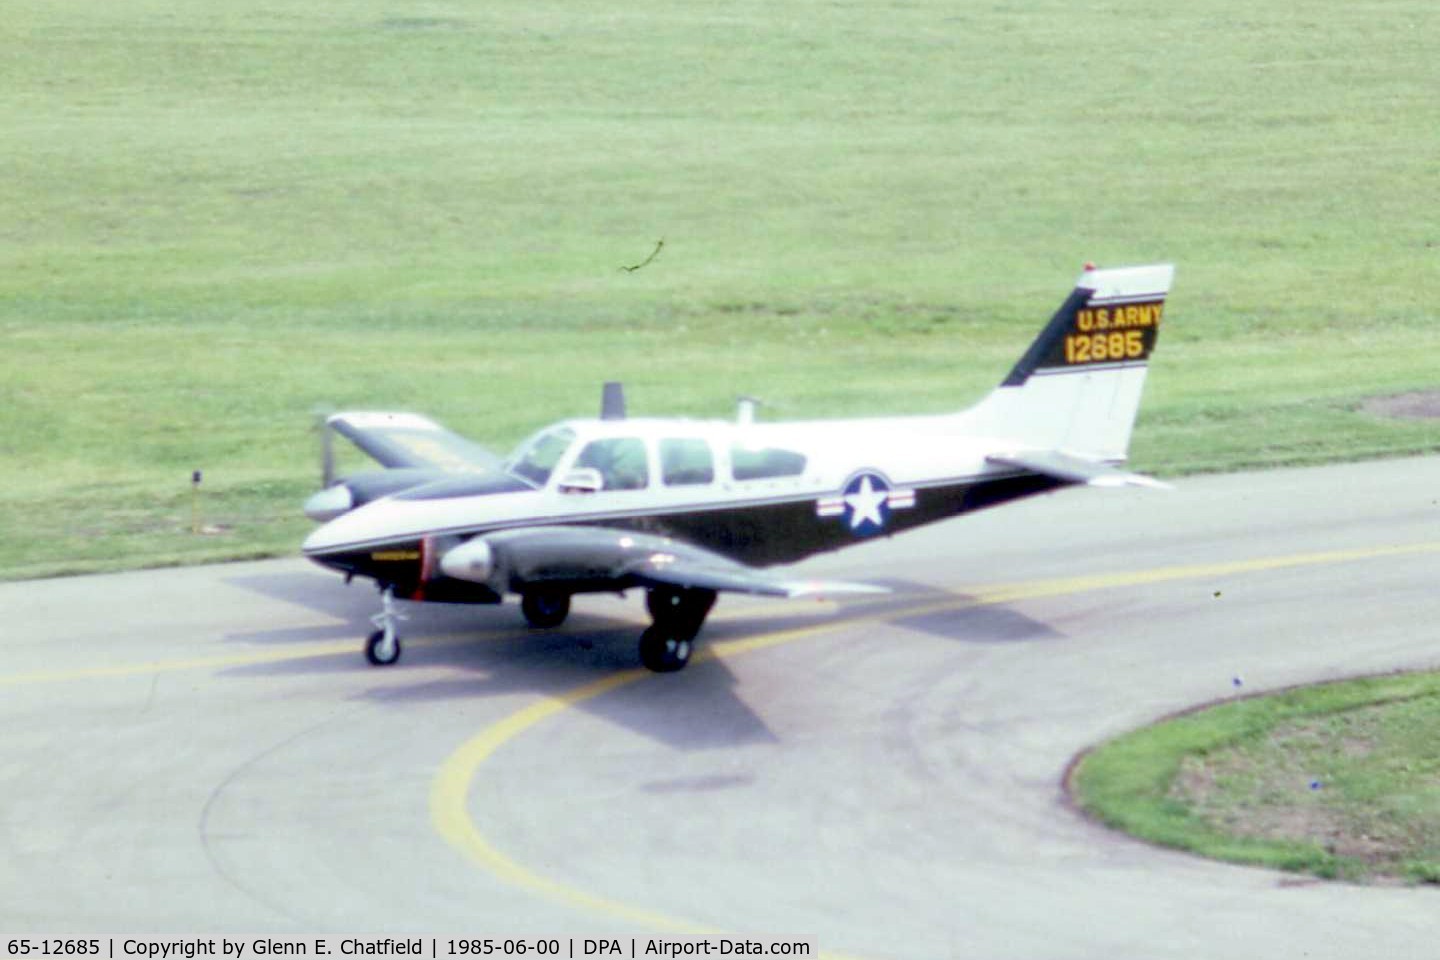 65-12685, 1965 Beech B-55 Baron (T-42A) C/N TF-7, T-42A 65-12685 when still active with the Army, taxiing by the control tower.